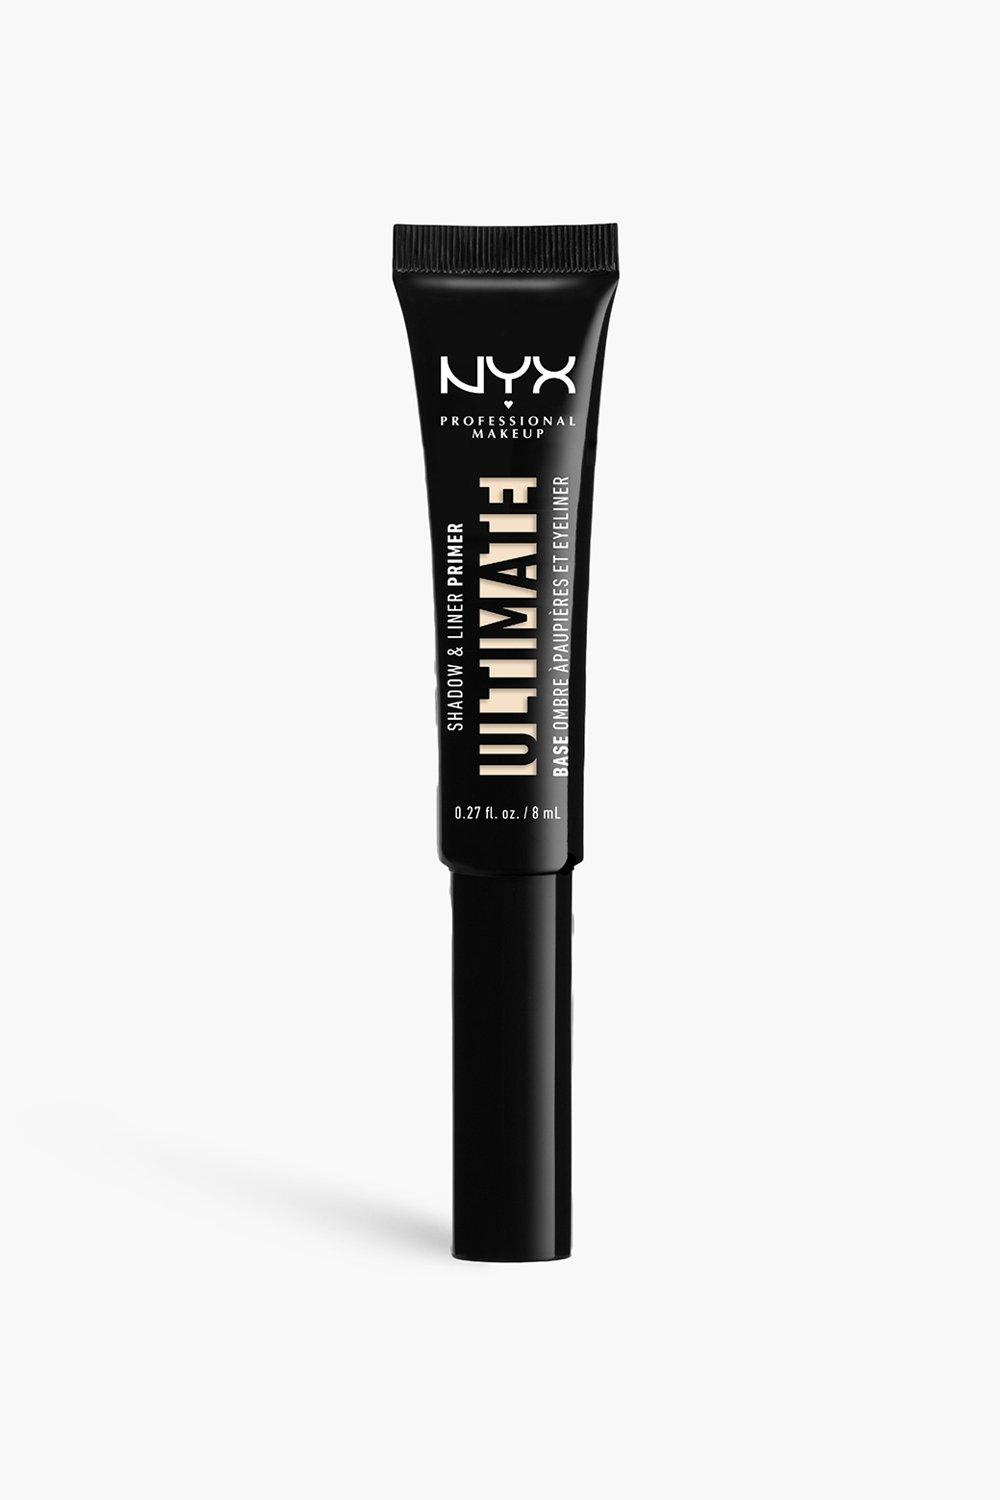 Nyx Professional Makeup Vitamin E Infused Ultimate Shadow And Liner Primer, 01 Light